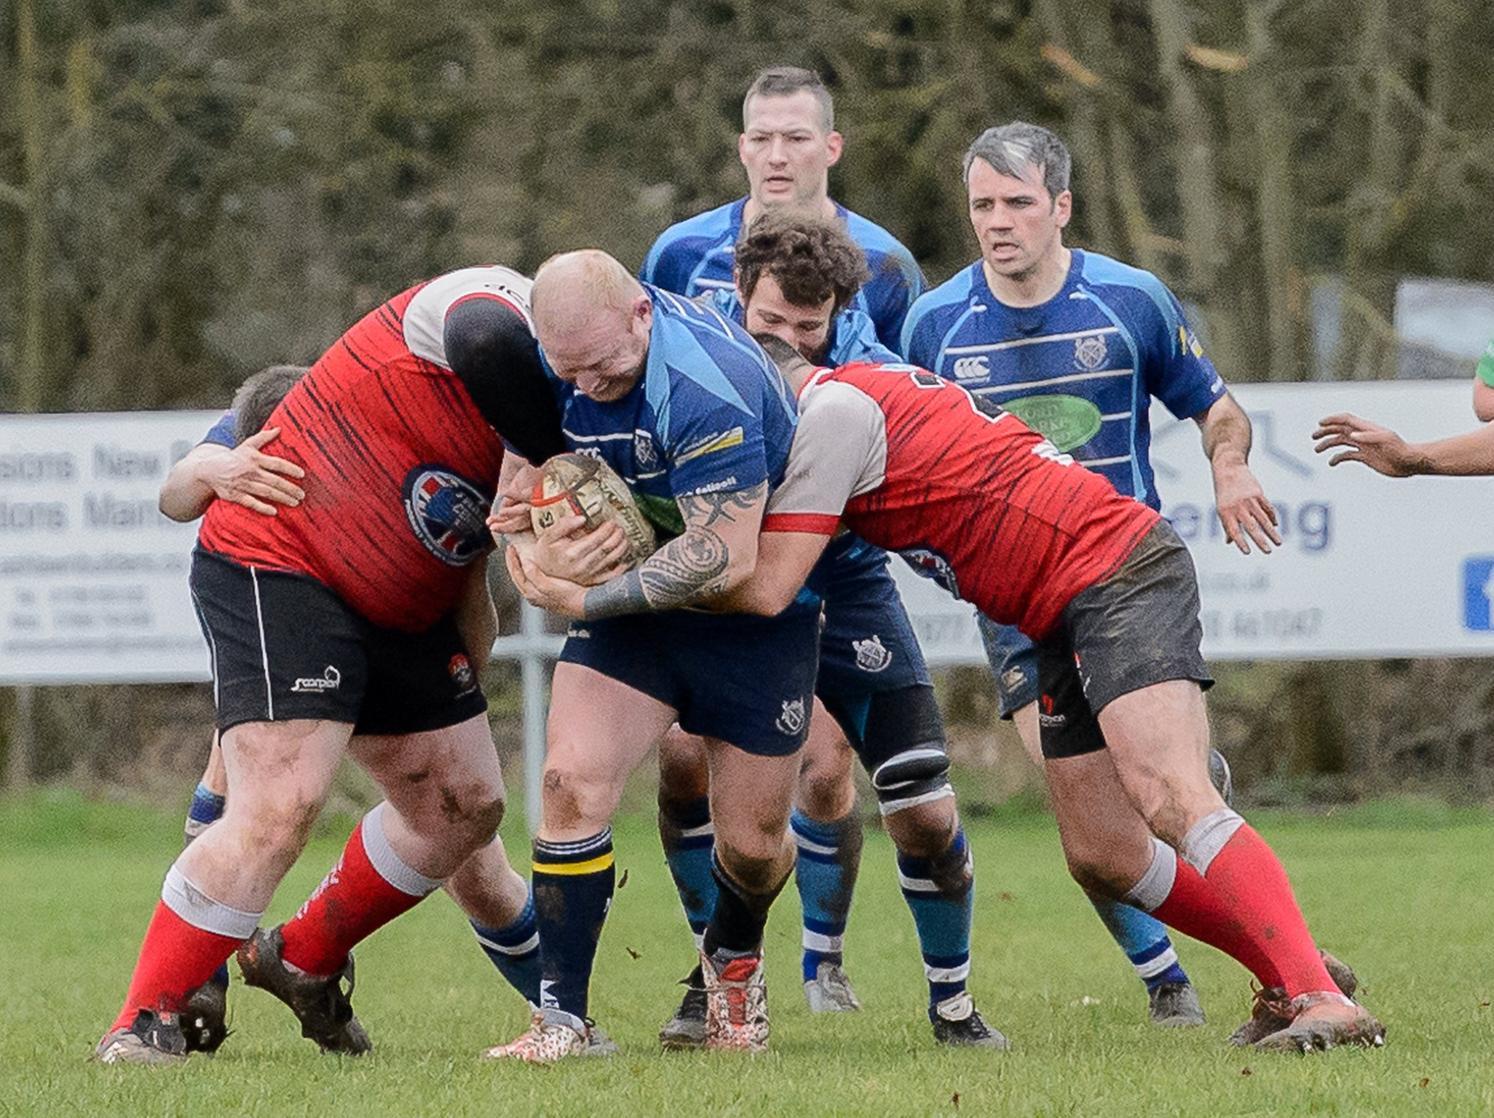 Keith Lister with the ball for Rugby St Andrews